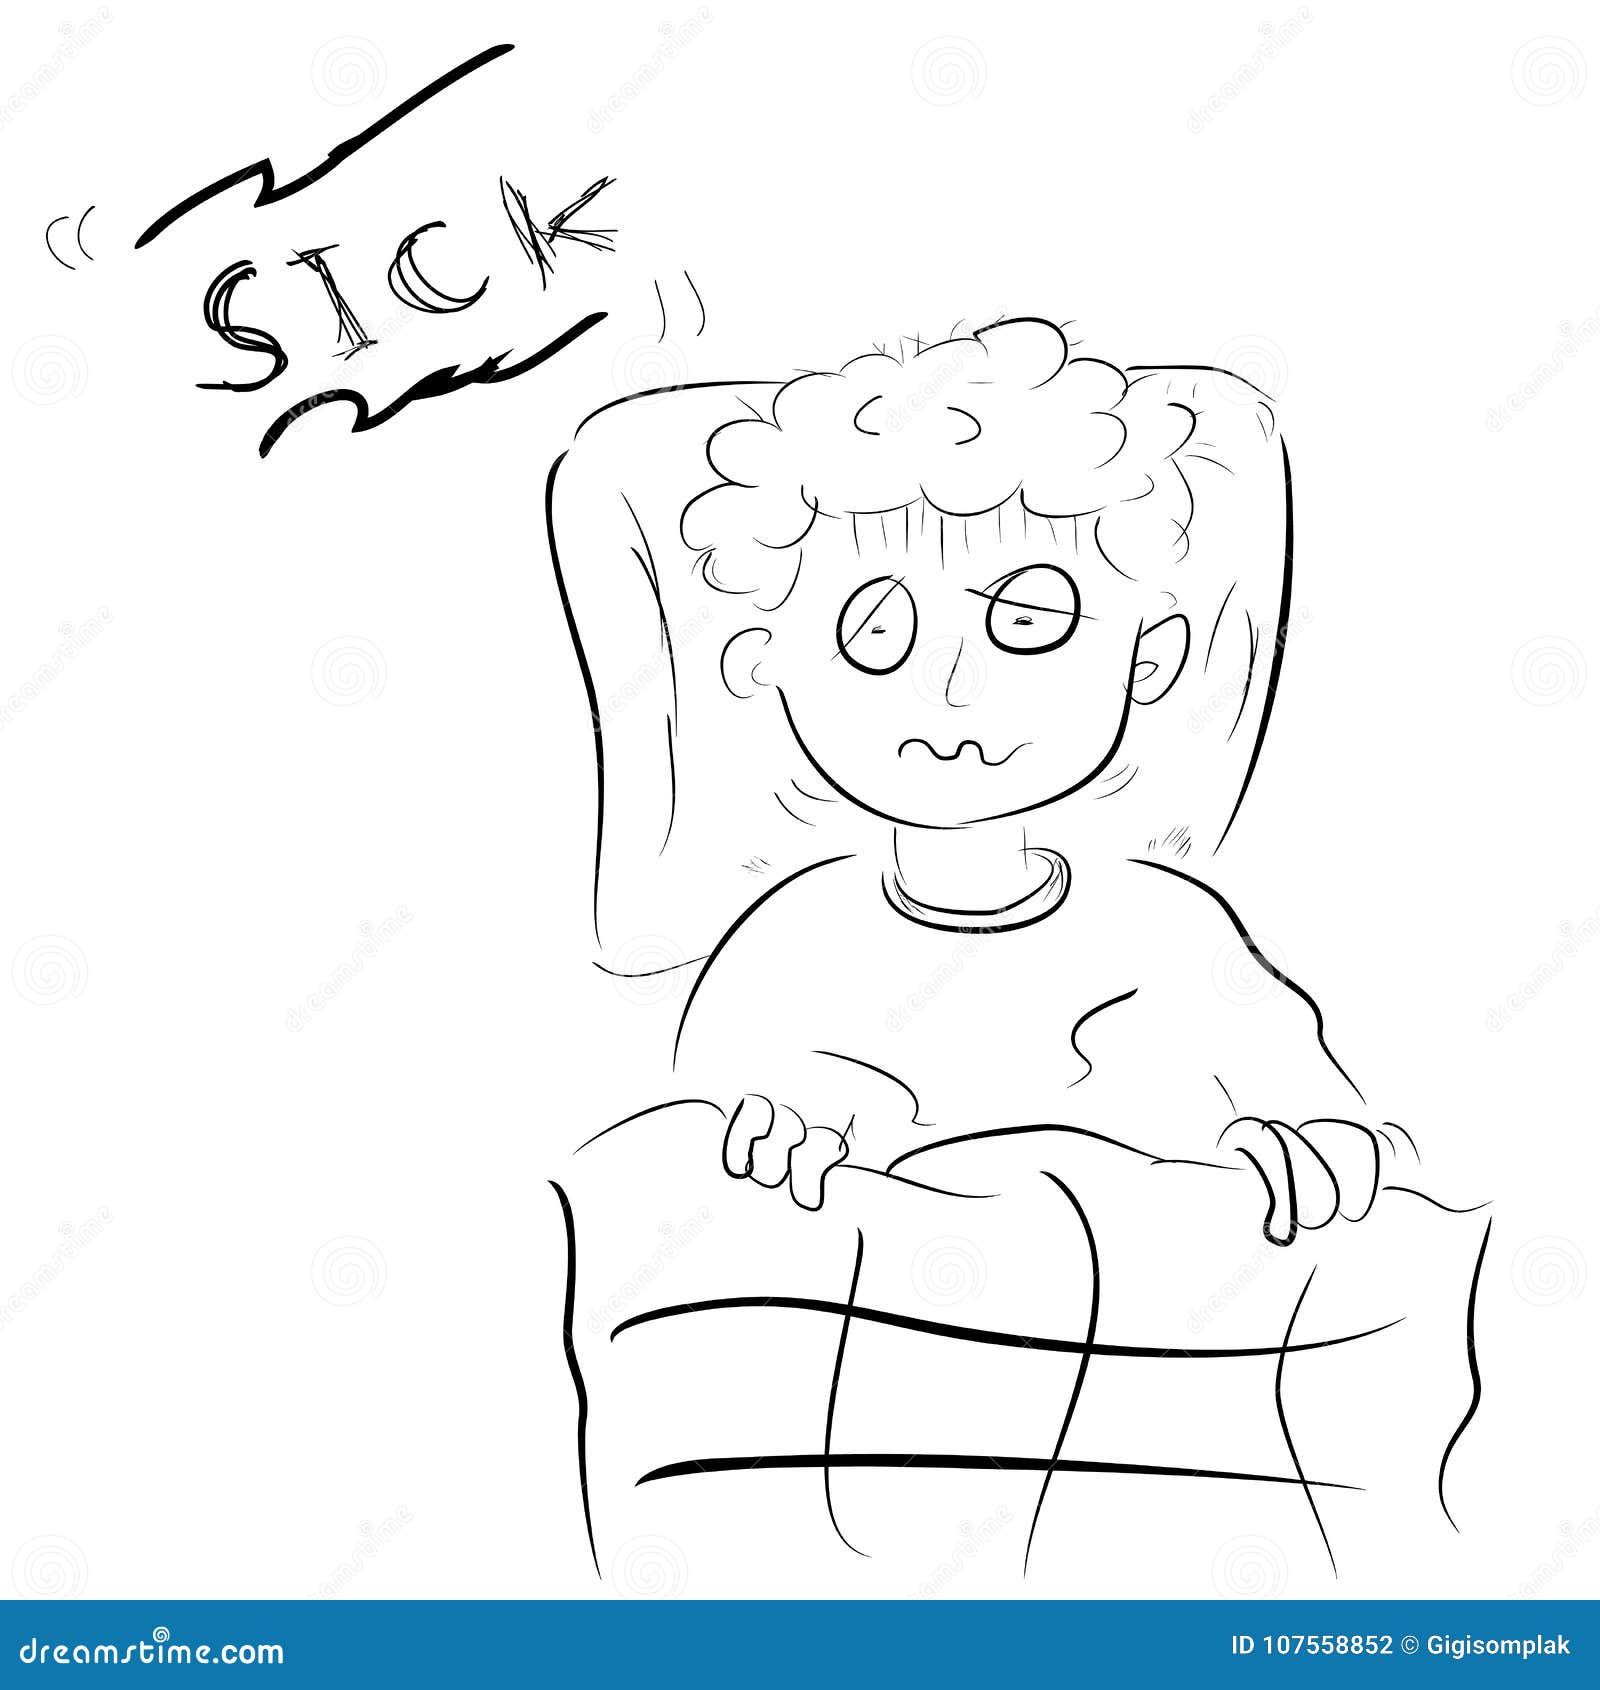 Sick Drawing / Most relevant best selling latest uploads. - Voodoking